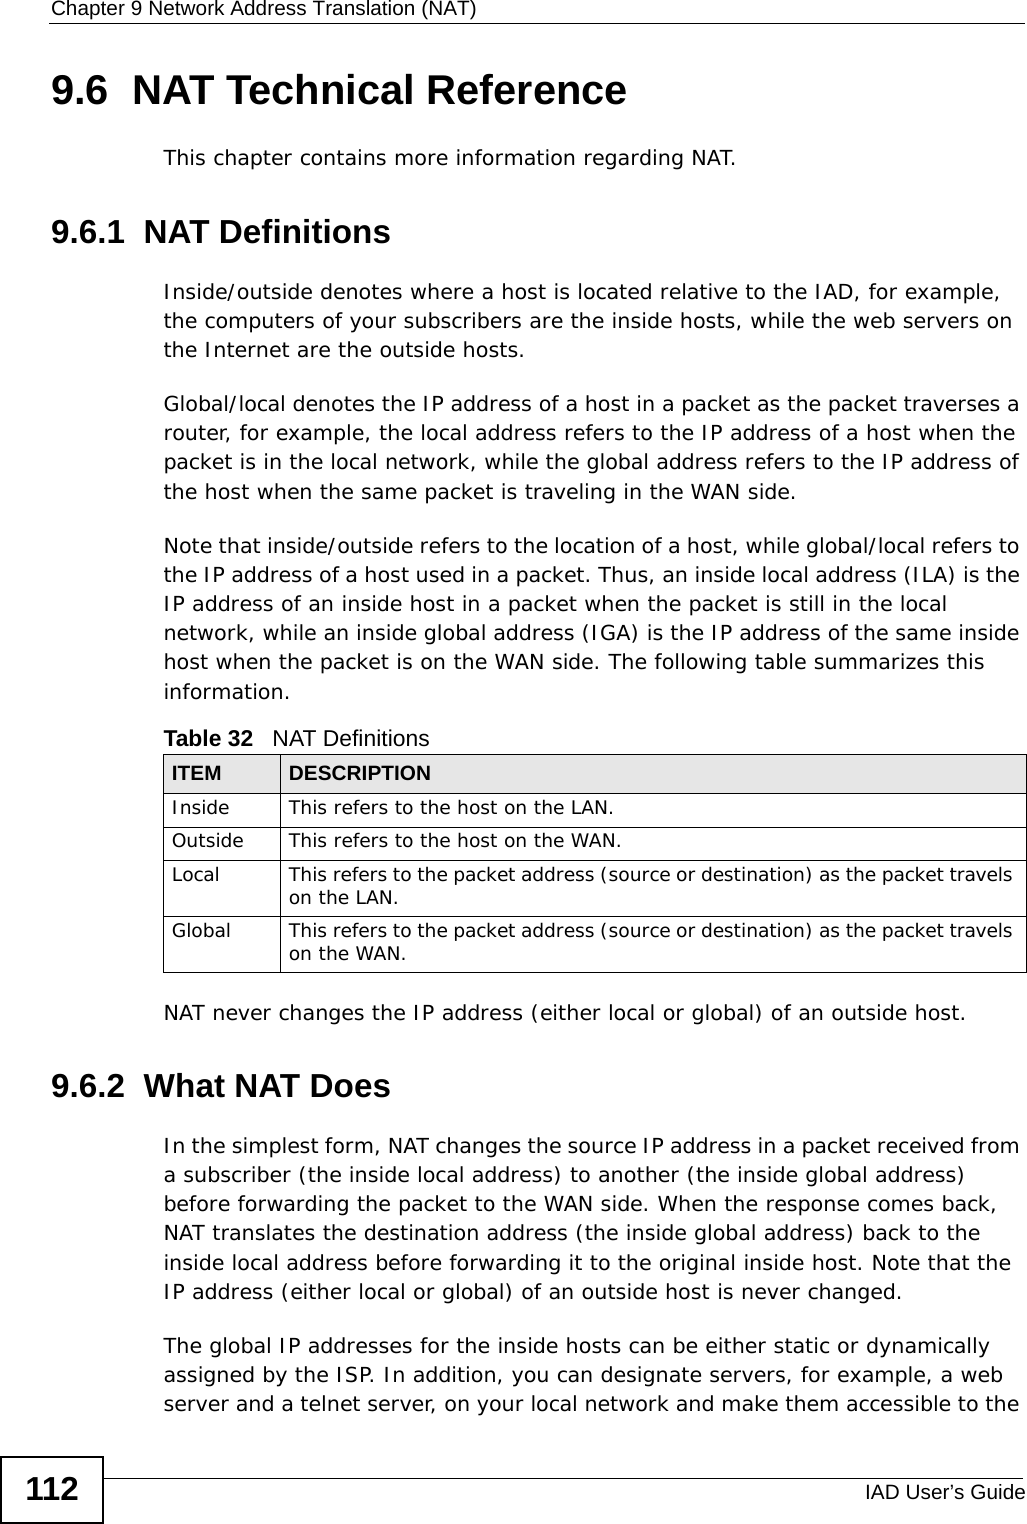 Chapter 9 Network Address Translation (NAT)IAD User’s Guide1129.6  NAT Technical ReferenceThis chapter contains more information regarding NAT.9.6.1  NAT DefinitionsInside/outside denotes where a host is located relative to the IAD, for example, the computers of your subscribers are the inside hosts, while the web servers on the Internet are the outside hosts. Global/local denotes the IP address of a host in a packet as the packet traverses a router, for example, the local address refers to the IP address of a host when the packet is in the local network, while the global address refers to the IP address of the host when the same packet is traveling in the WAN side. Note that inside/outside refers to the location of a host, while global/local refers to the IP address of a host used in a packet. Thus, an inside local address (ILA) is the IP address of an inside host in a packet when the packet is still in the local network, while an inside global address (IGA) is the IP address of the same inside host when the packet is on the WAN side. The following table summarizes this information.NAT never changes the IP address (either local or global) of an outside host.9.6.2  What NAT DoesIn the simplest form, NAT changes the source IP address in a packet received from a subscriber (the inside local address) to another (the inside global address) before forwarding the packet to the WAN side. When the response comes back, NAT translates the destination address (the inside global address) back to the inside local address before forwarding it to the original inside host. Note that the IP address (either local or global) of an outside host is never changed.The global IP addresses for the inside hosts can be either static or dynamically assigned by the ISP. In addition, you can designate servers, for example, a web server and a telnet server, on your local network and make them accessible to the Table 32   NAT DefinitionsITEM DESCRIPTIONInside This refers to the host on the LAN.Outside This refers to the host on the WAN.Local This refers to the packet address (source or destination) as the packet travels on the LAN.Global This refers to the packet address (source or destination) as the packet travels on the WAN.